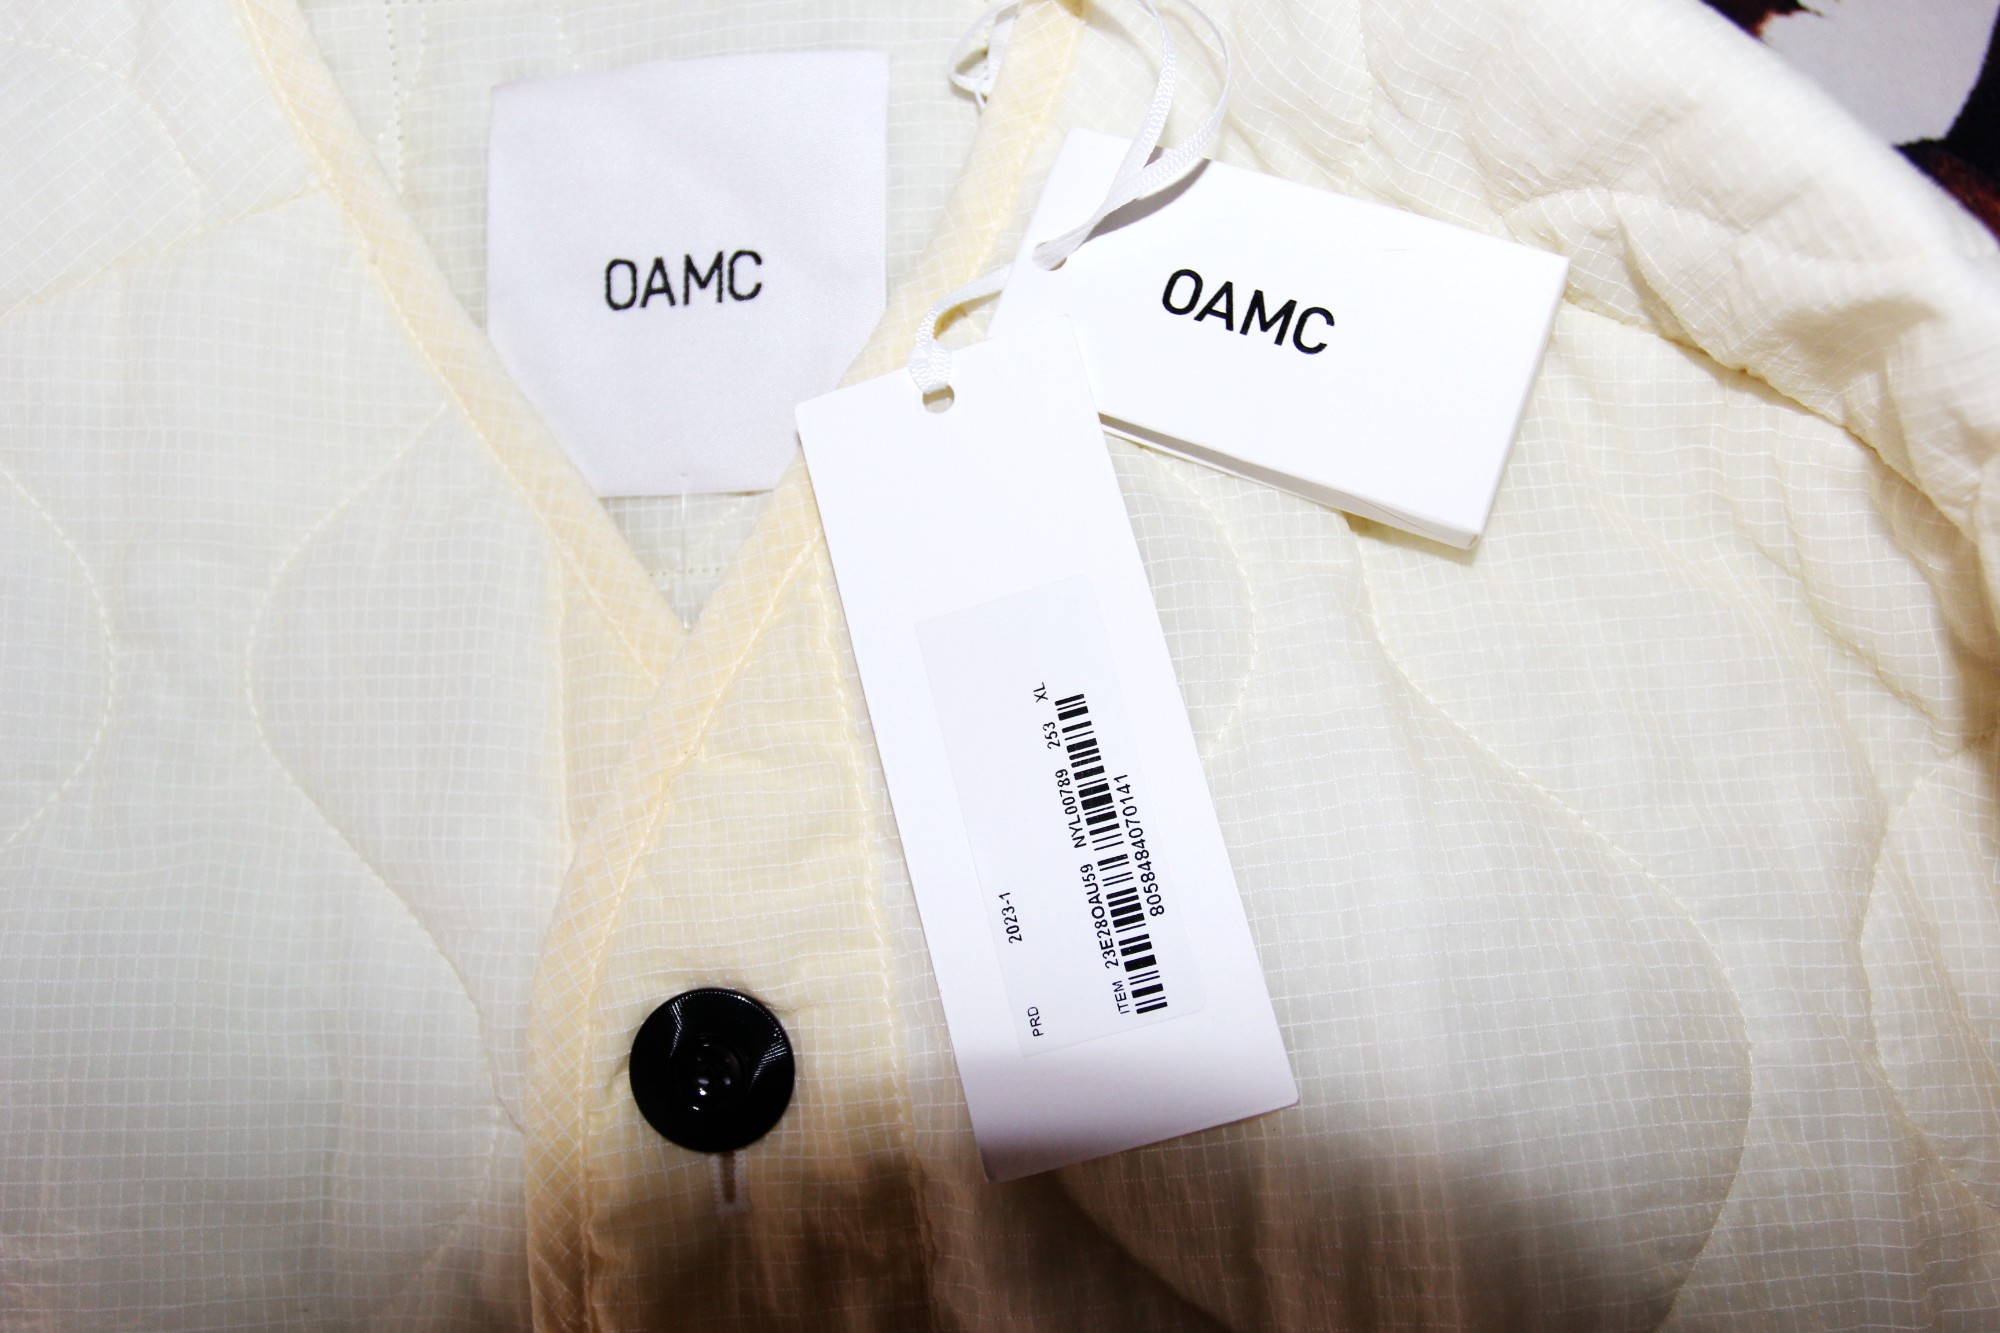 BNWT SS23 OAMC OFF-WHITE QUILTED JACKET XL - 7